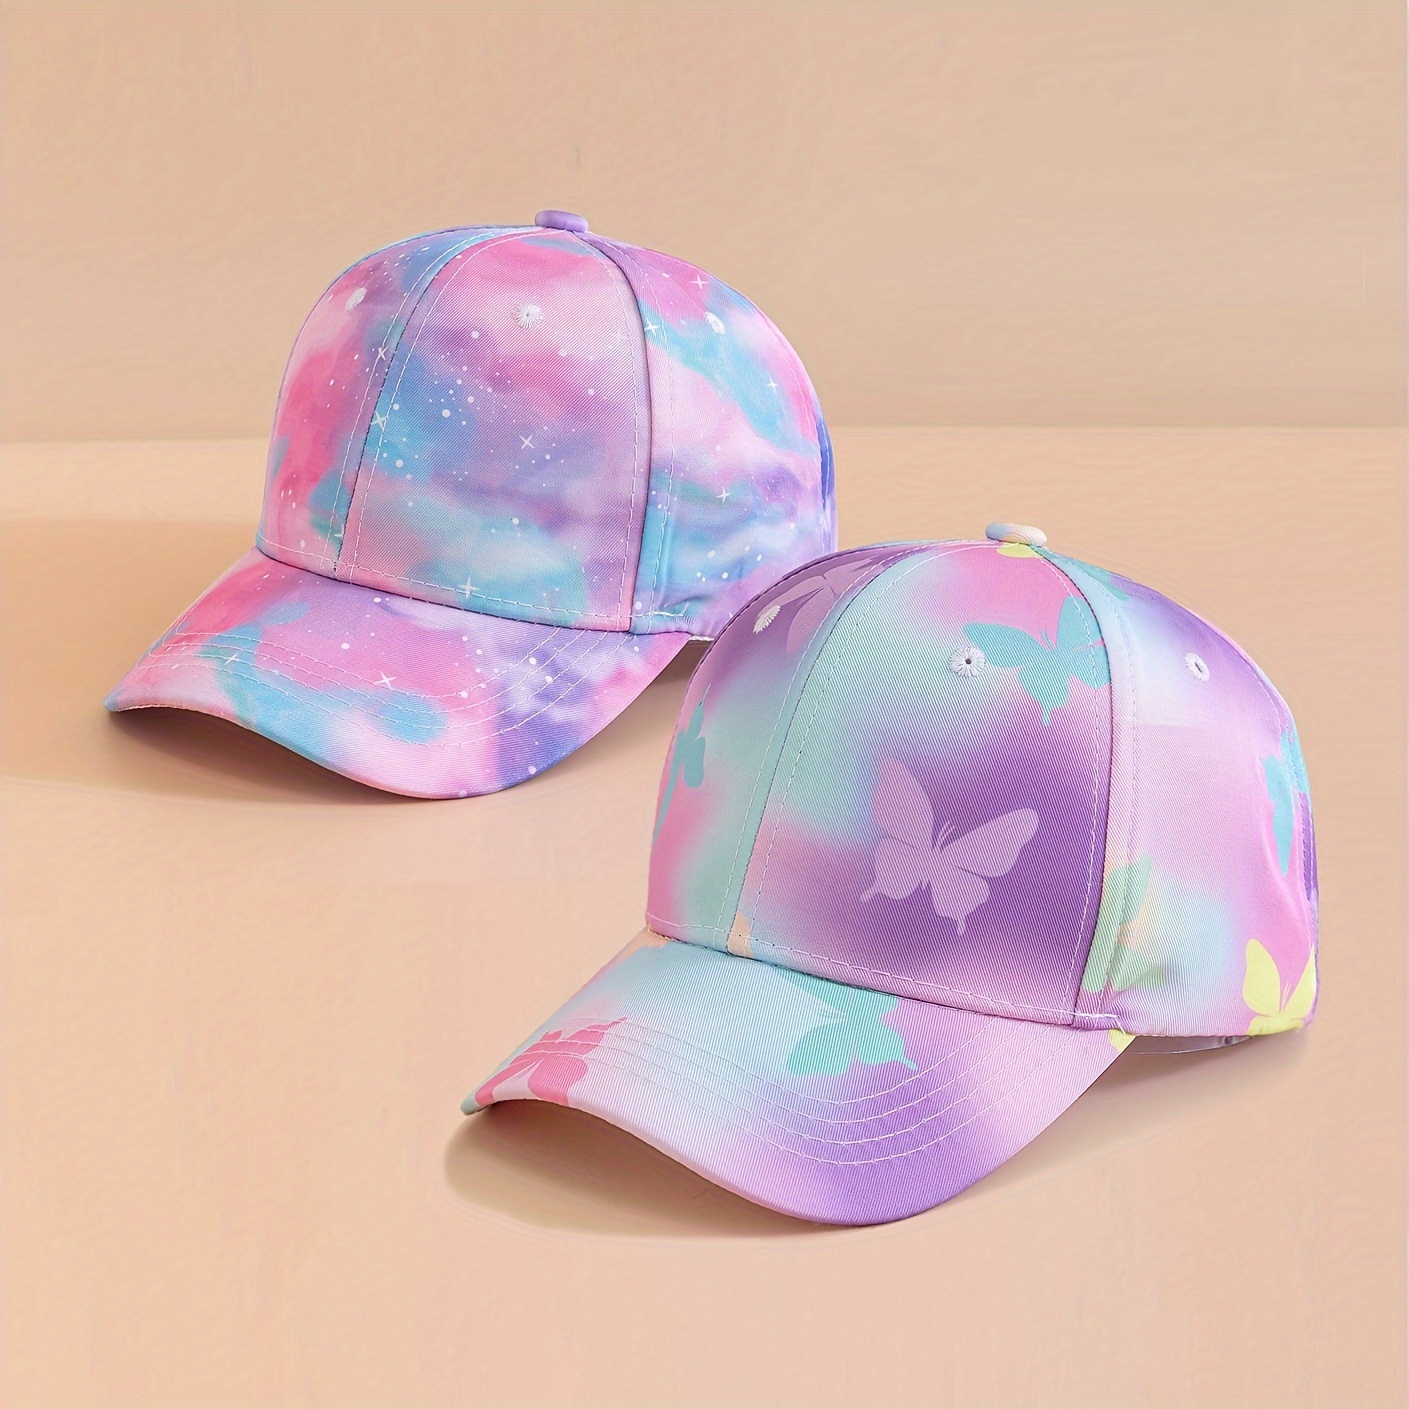 

Children's Baseball Cap With Butterfly And Star Tie Dye Design - Suitable For Leisure, Play, And Travel - Youth Baseball Cap For 3-10 Years Old